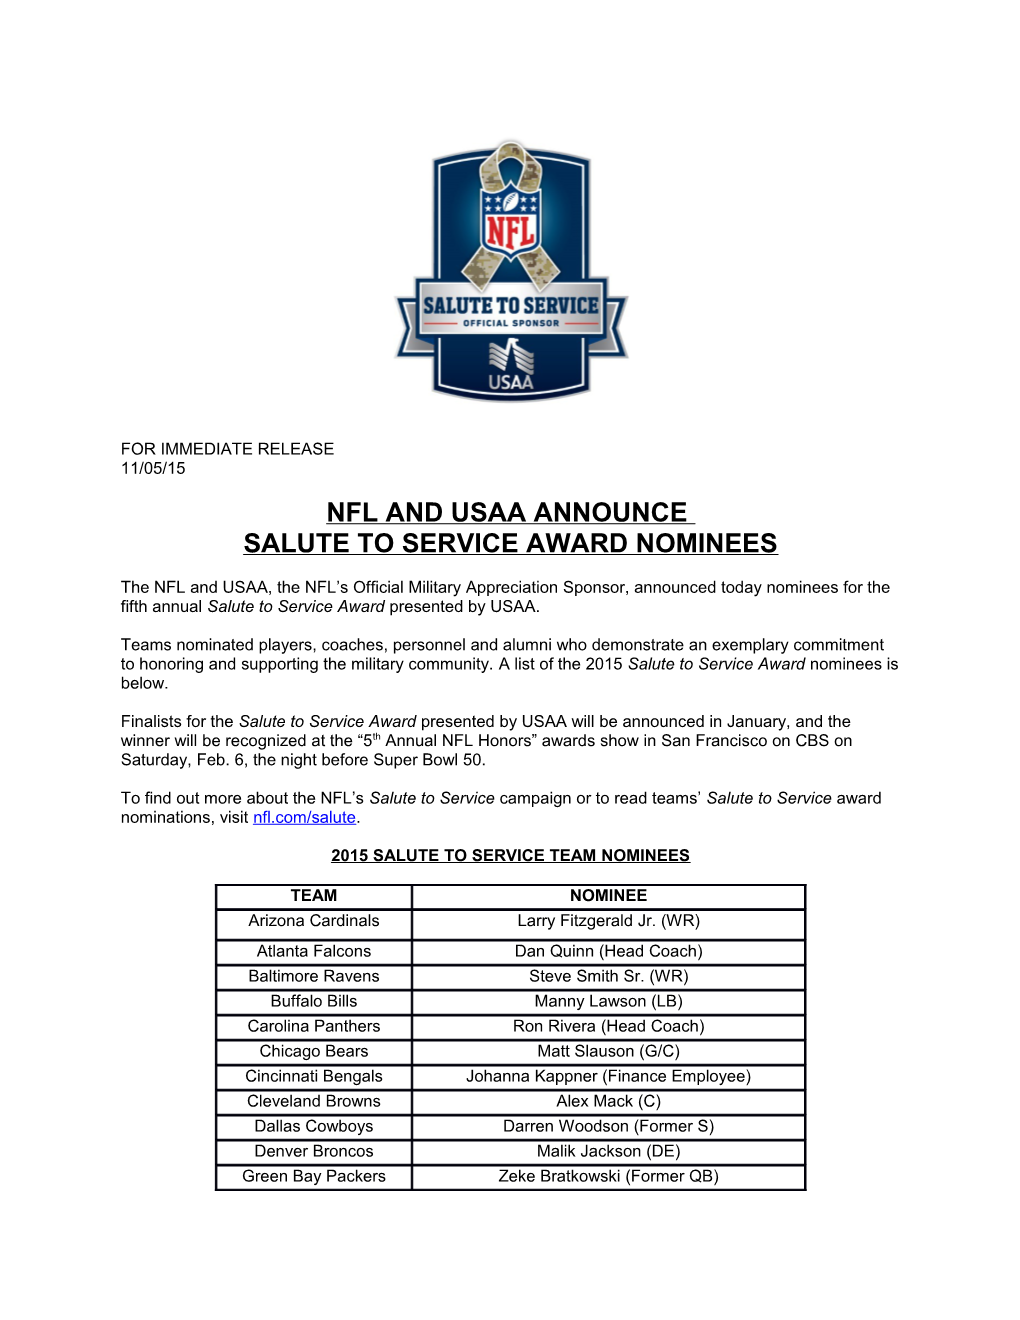 Nfl and Usaa Announce Salute to Service Award Nominees